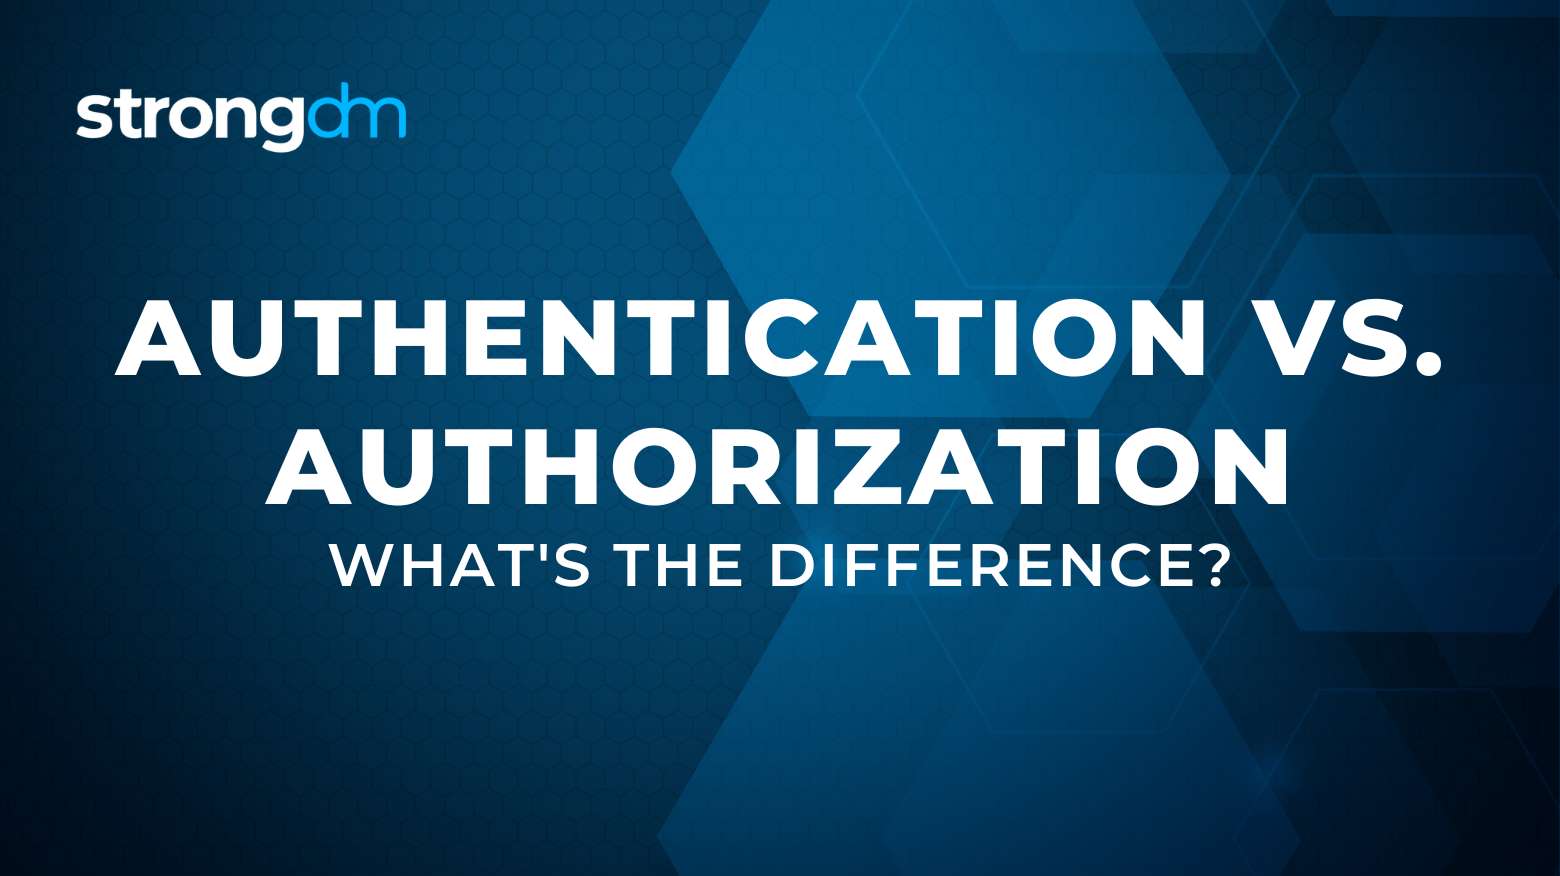 Authentication vs. Authorization: What's the Difference?